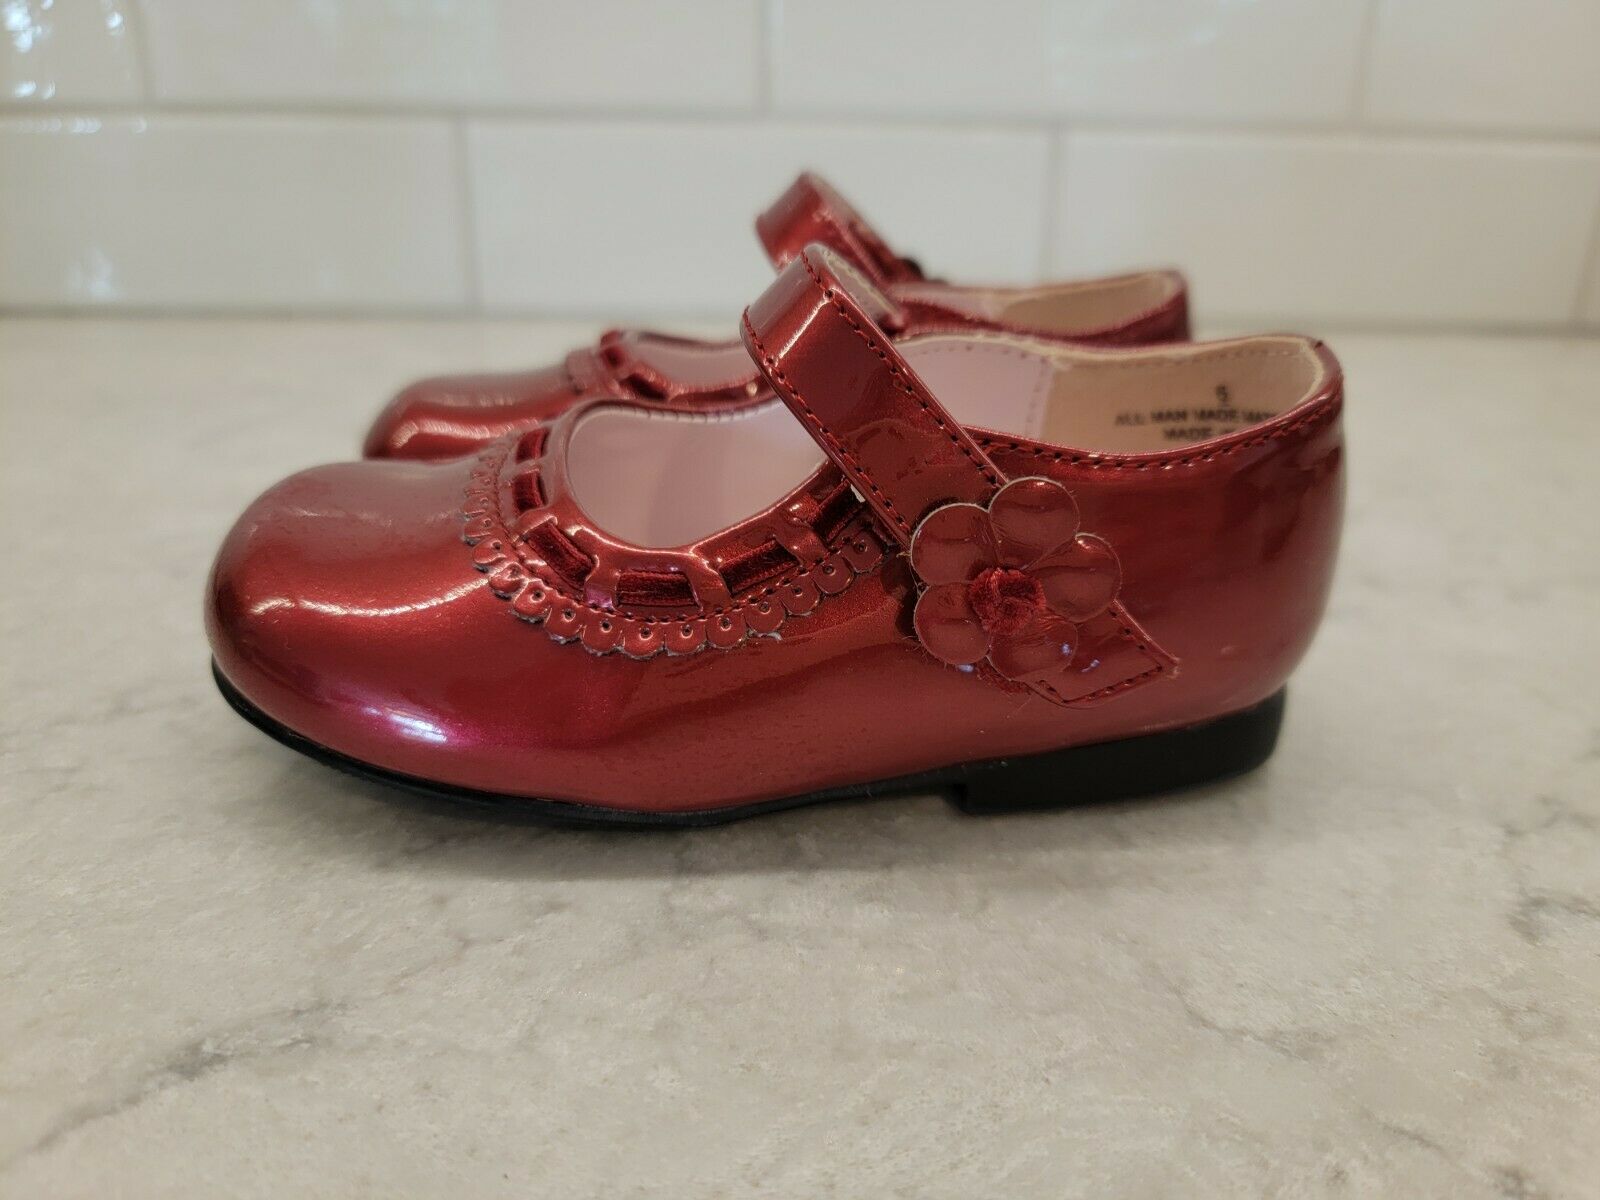 Toddler Girls Red Patent Dress Shoes - Christmas Holiday - Cherokee brand size 6